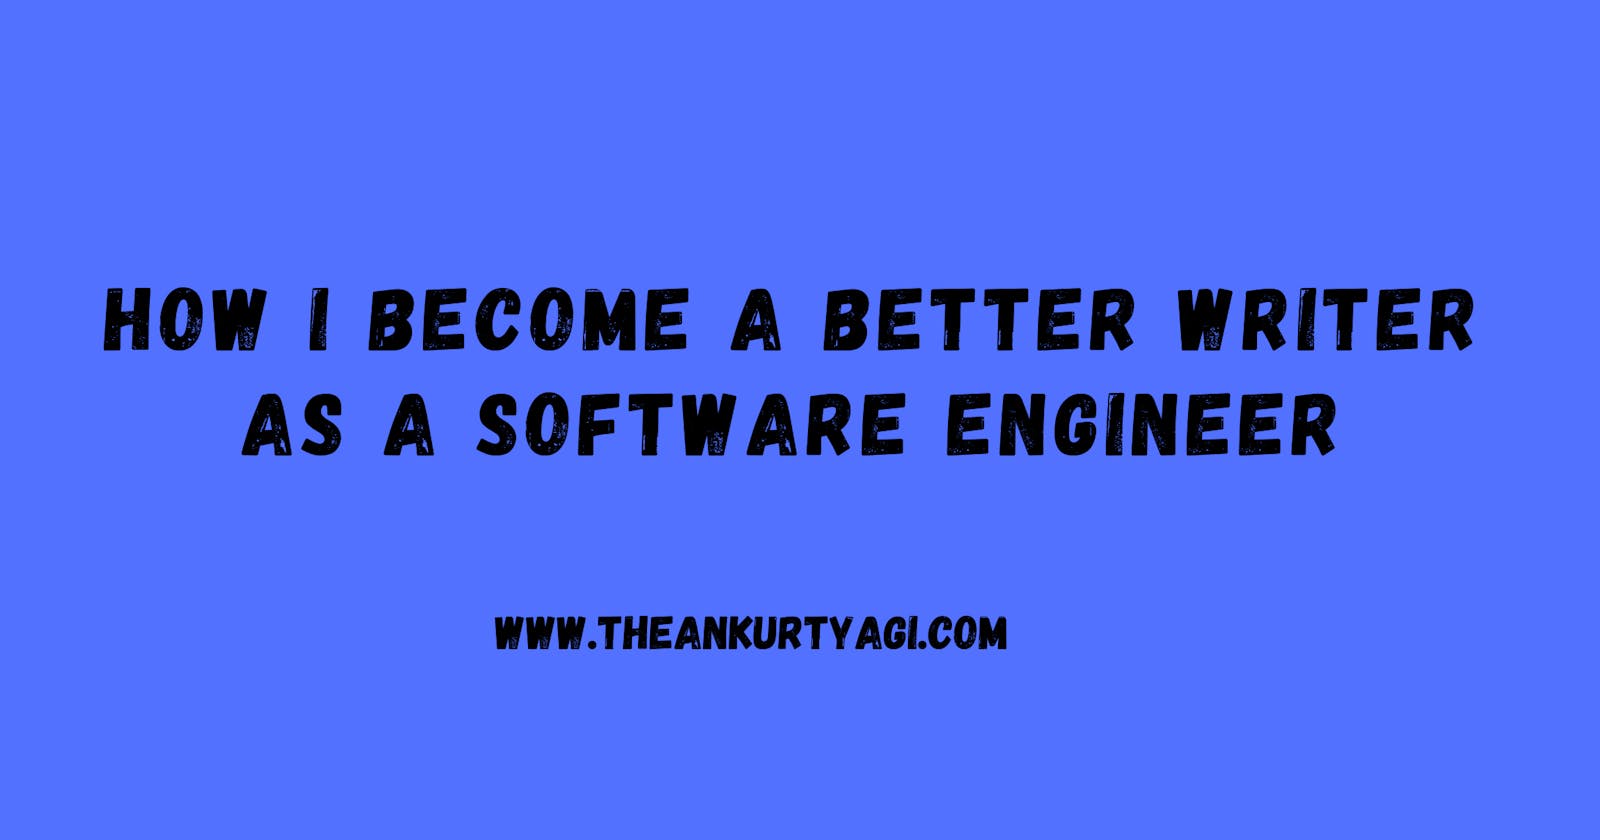 How I Become a Better Writer as a Software Engineer